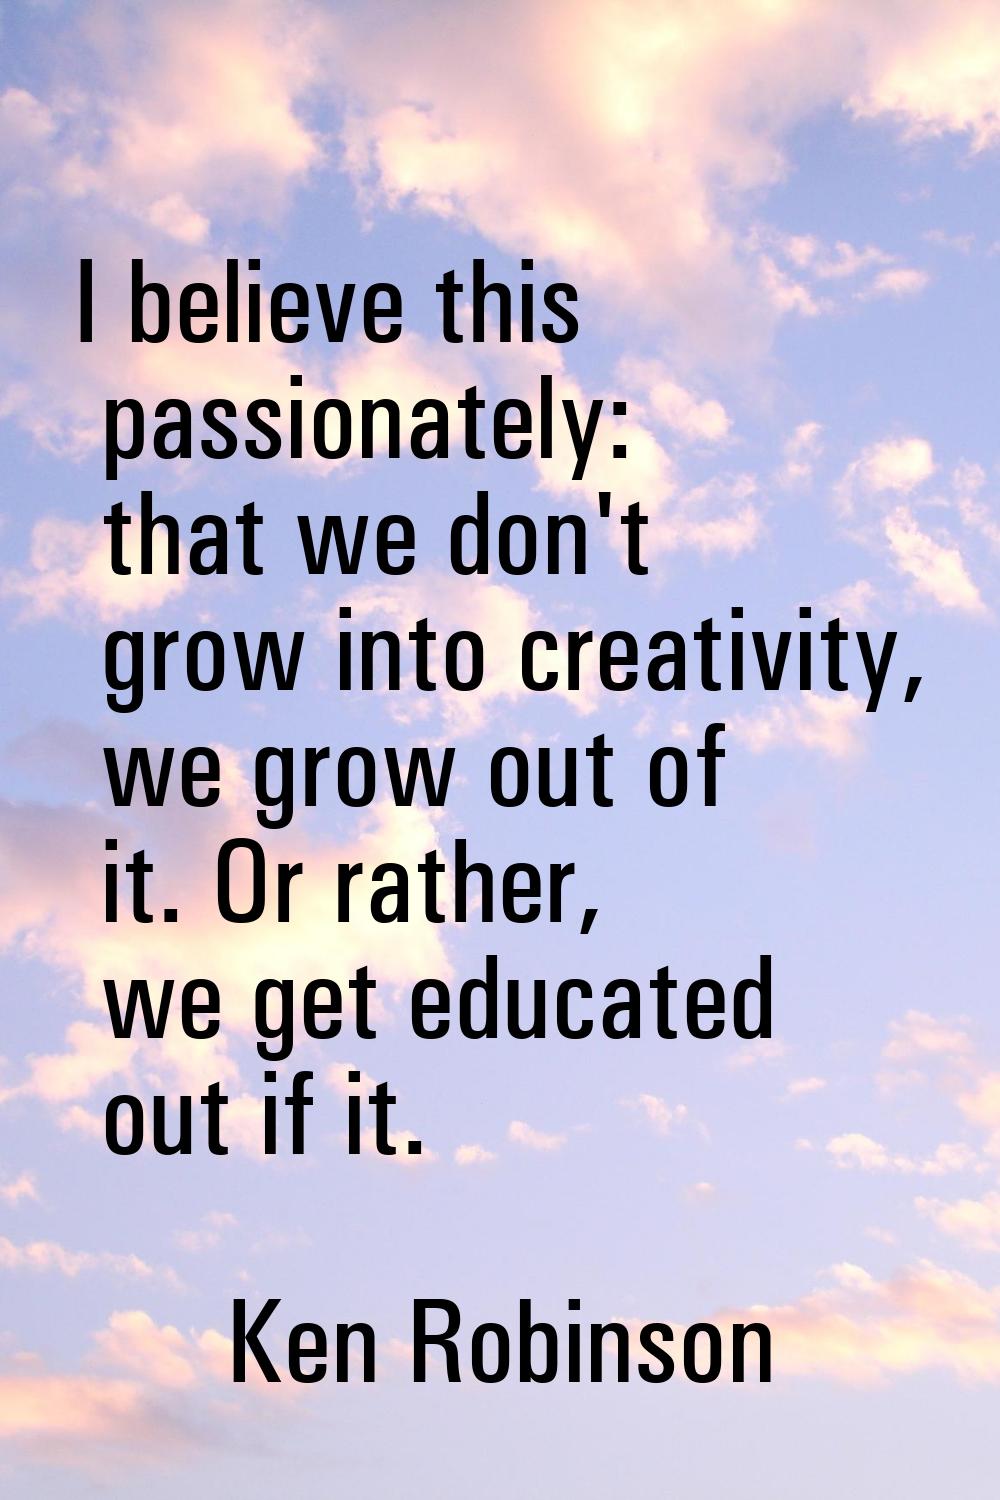 I believe this passionately: that we don't grow into creativity, we grow out of it. Or rather, we g